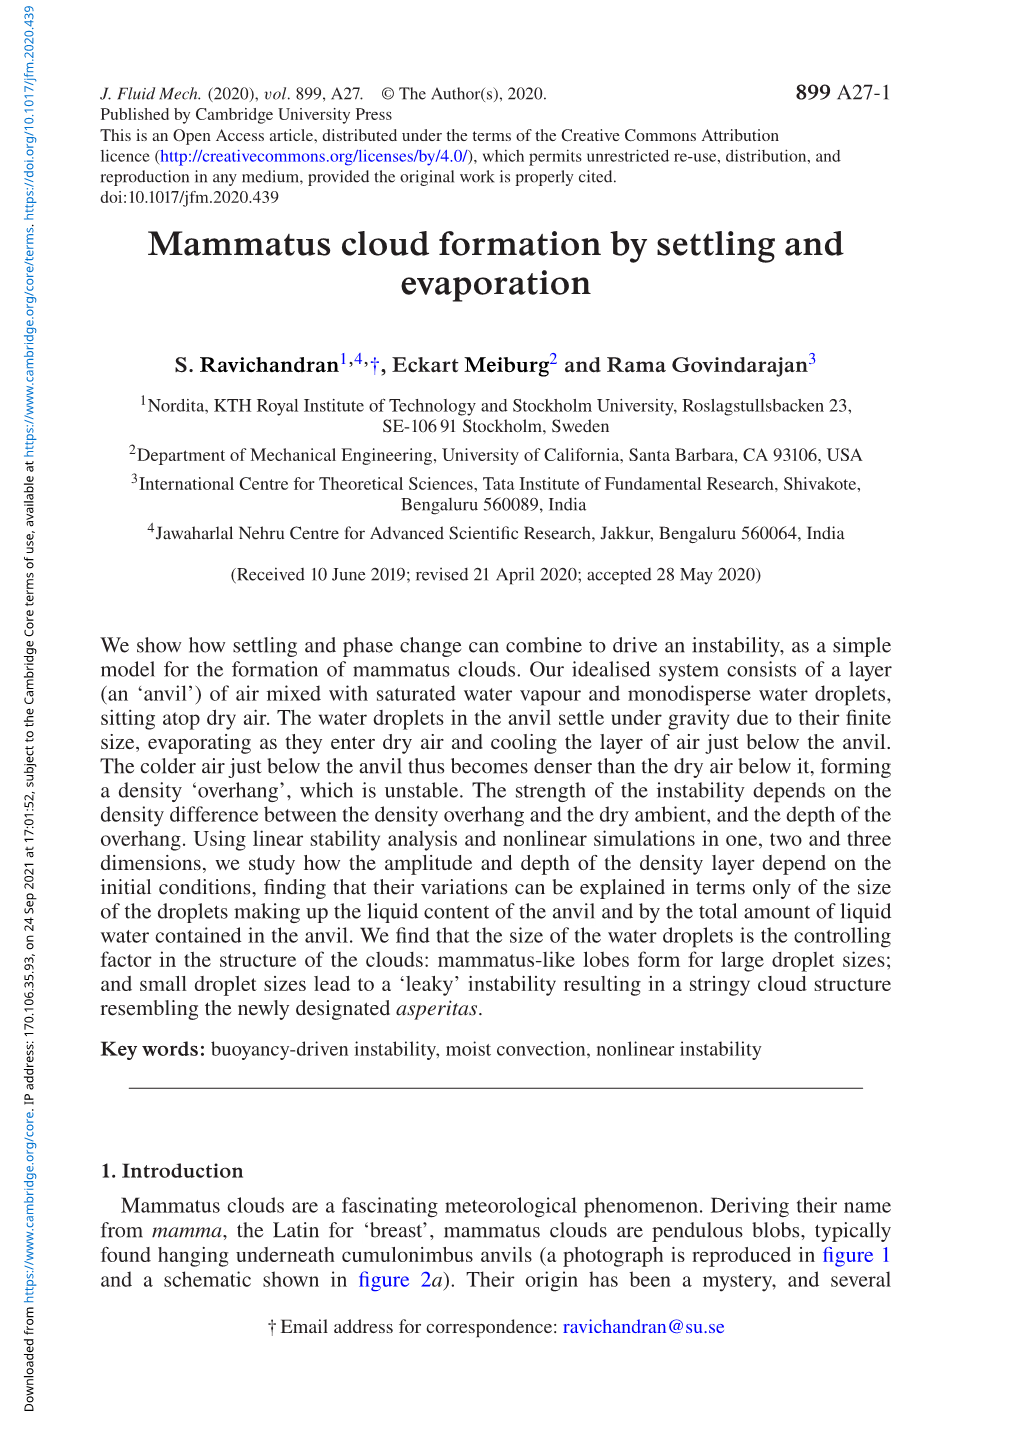 Mammatus Cloud Formation by Settling and Evaporation